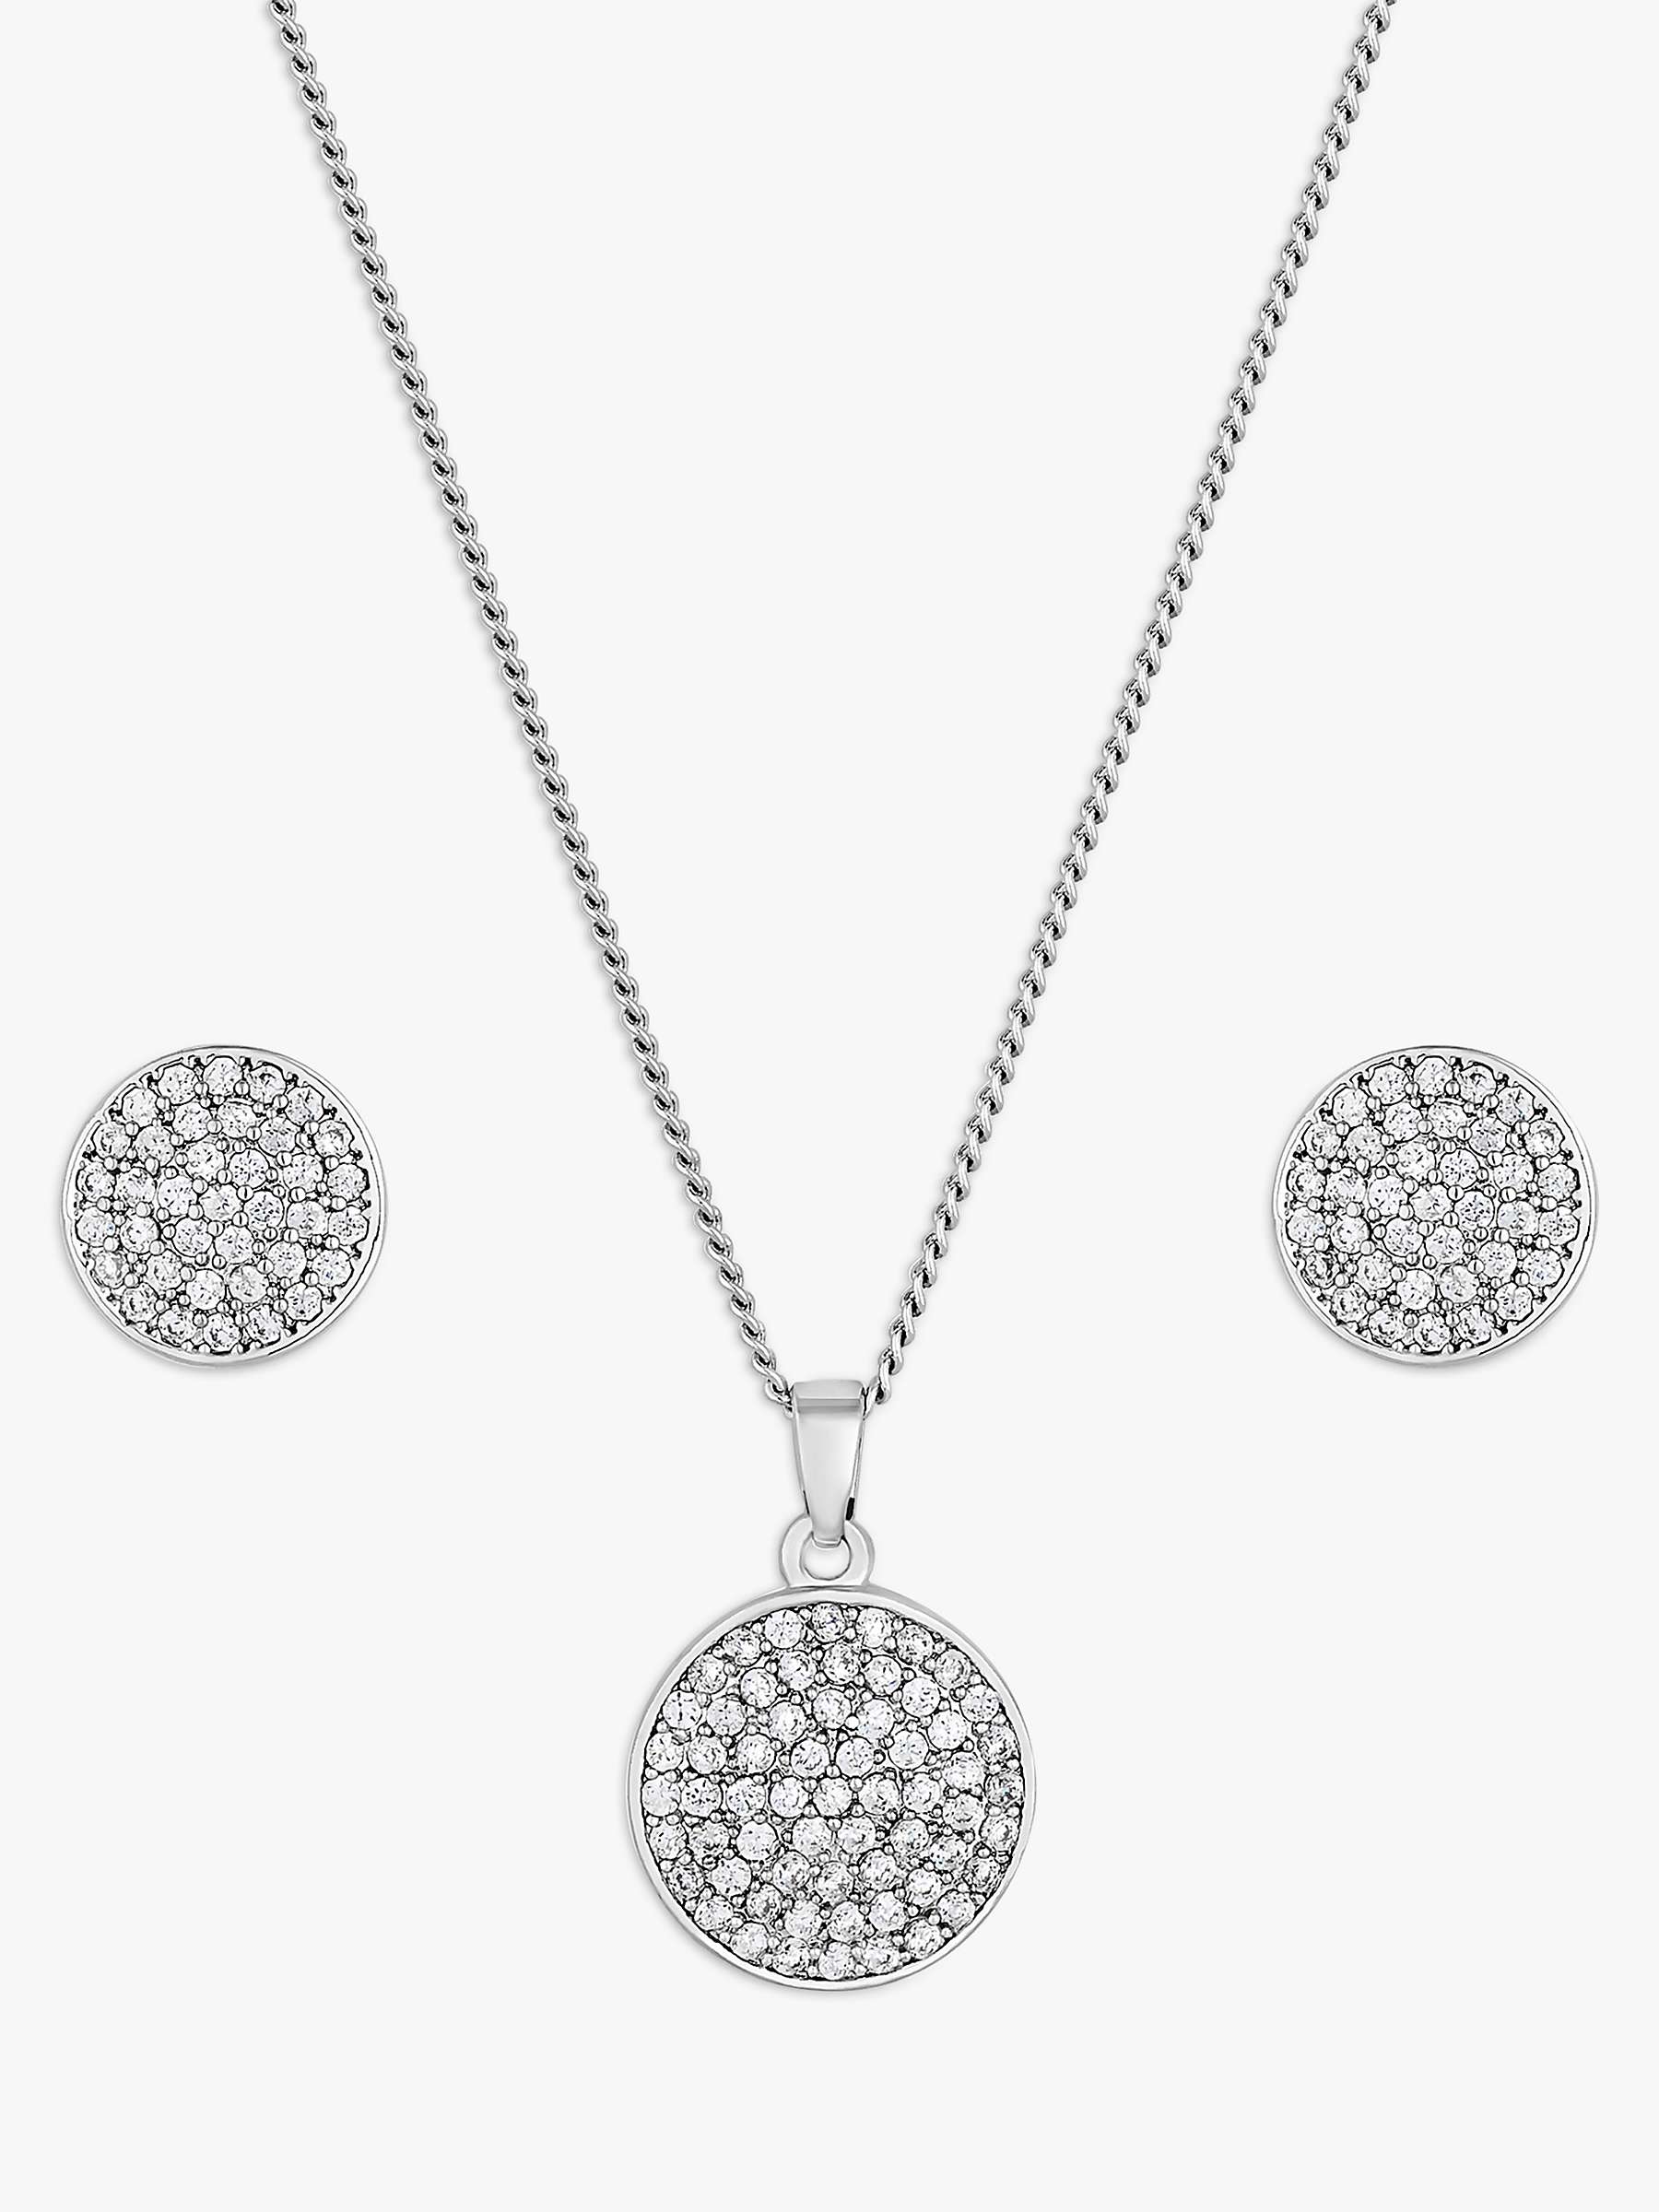 Buy Jon Richard Pave Cubic Zirconia Disc Necklace and Earring Jewellery Set, Silver Online at johnlewis.com